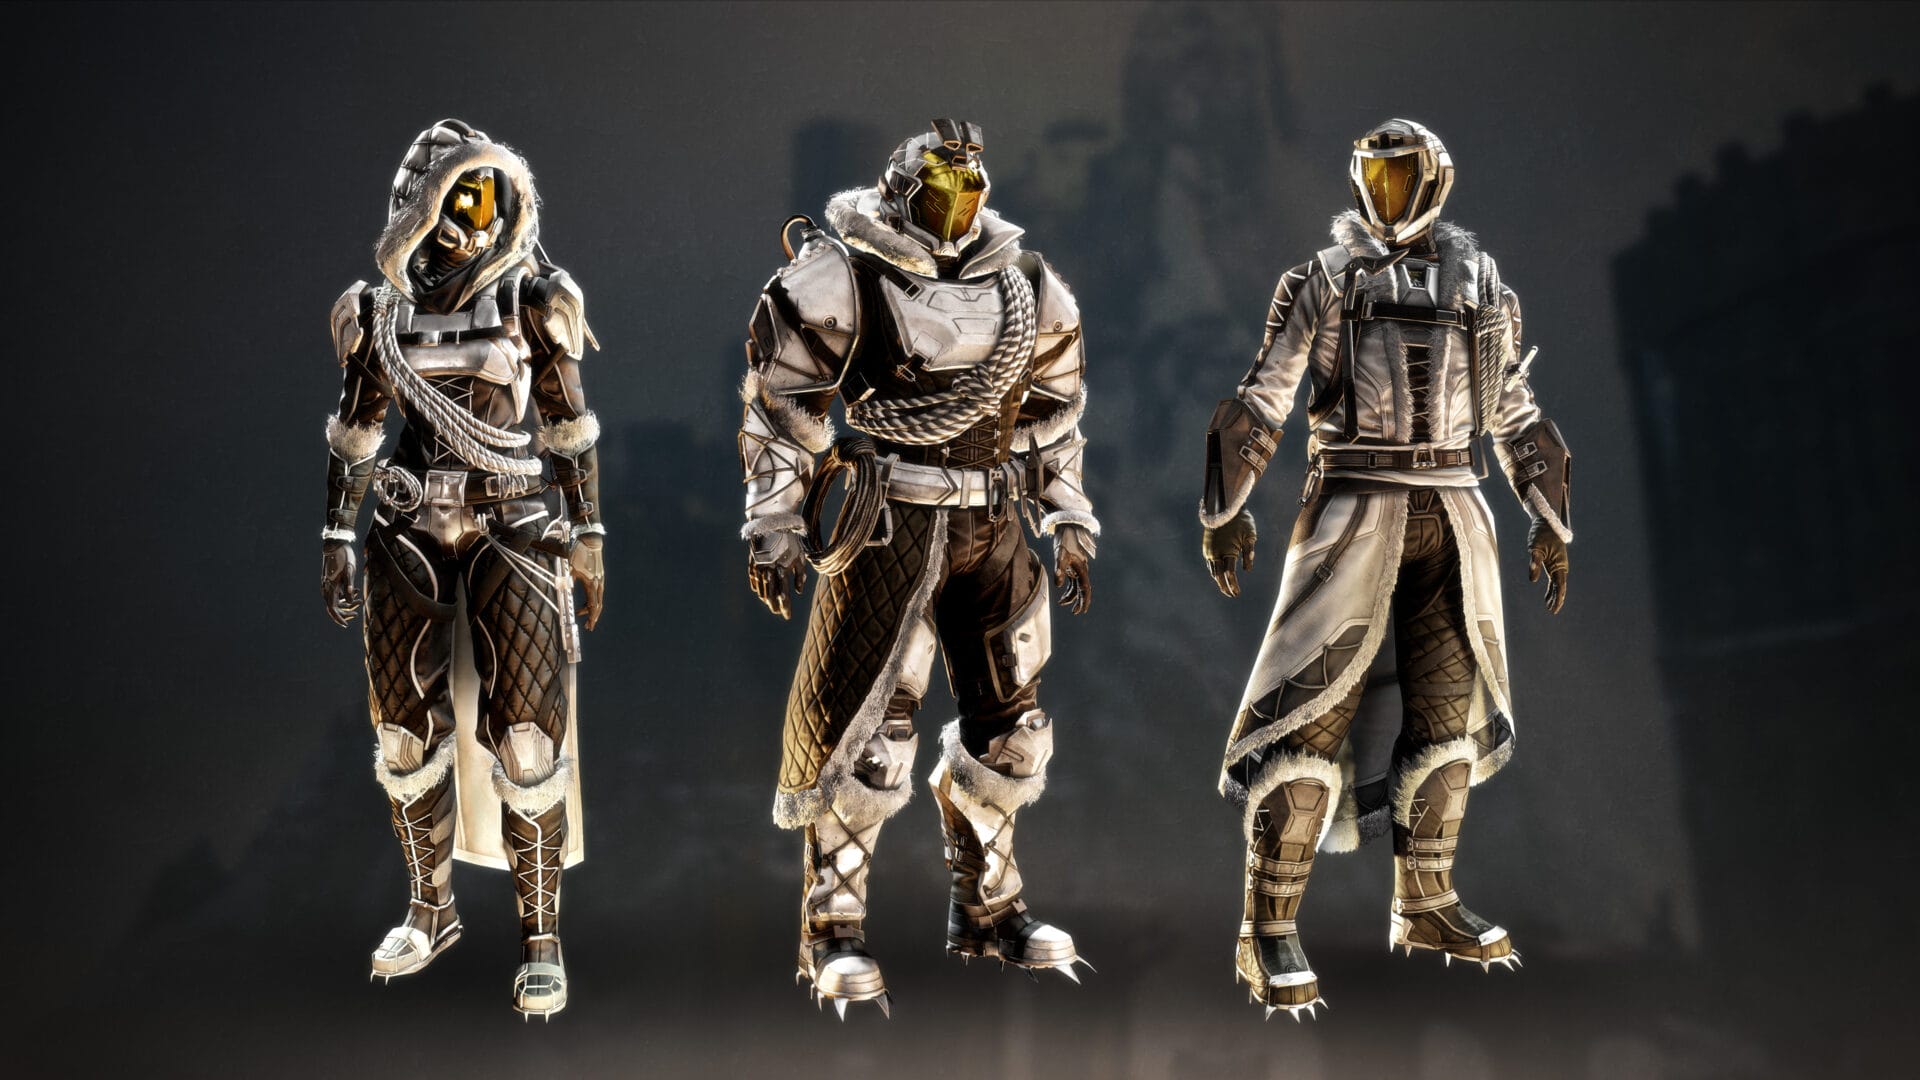 Warlord's Ruin Armor featured Destiny 2